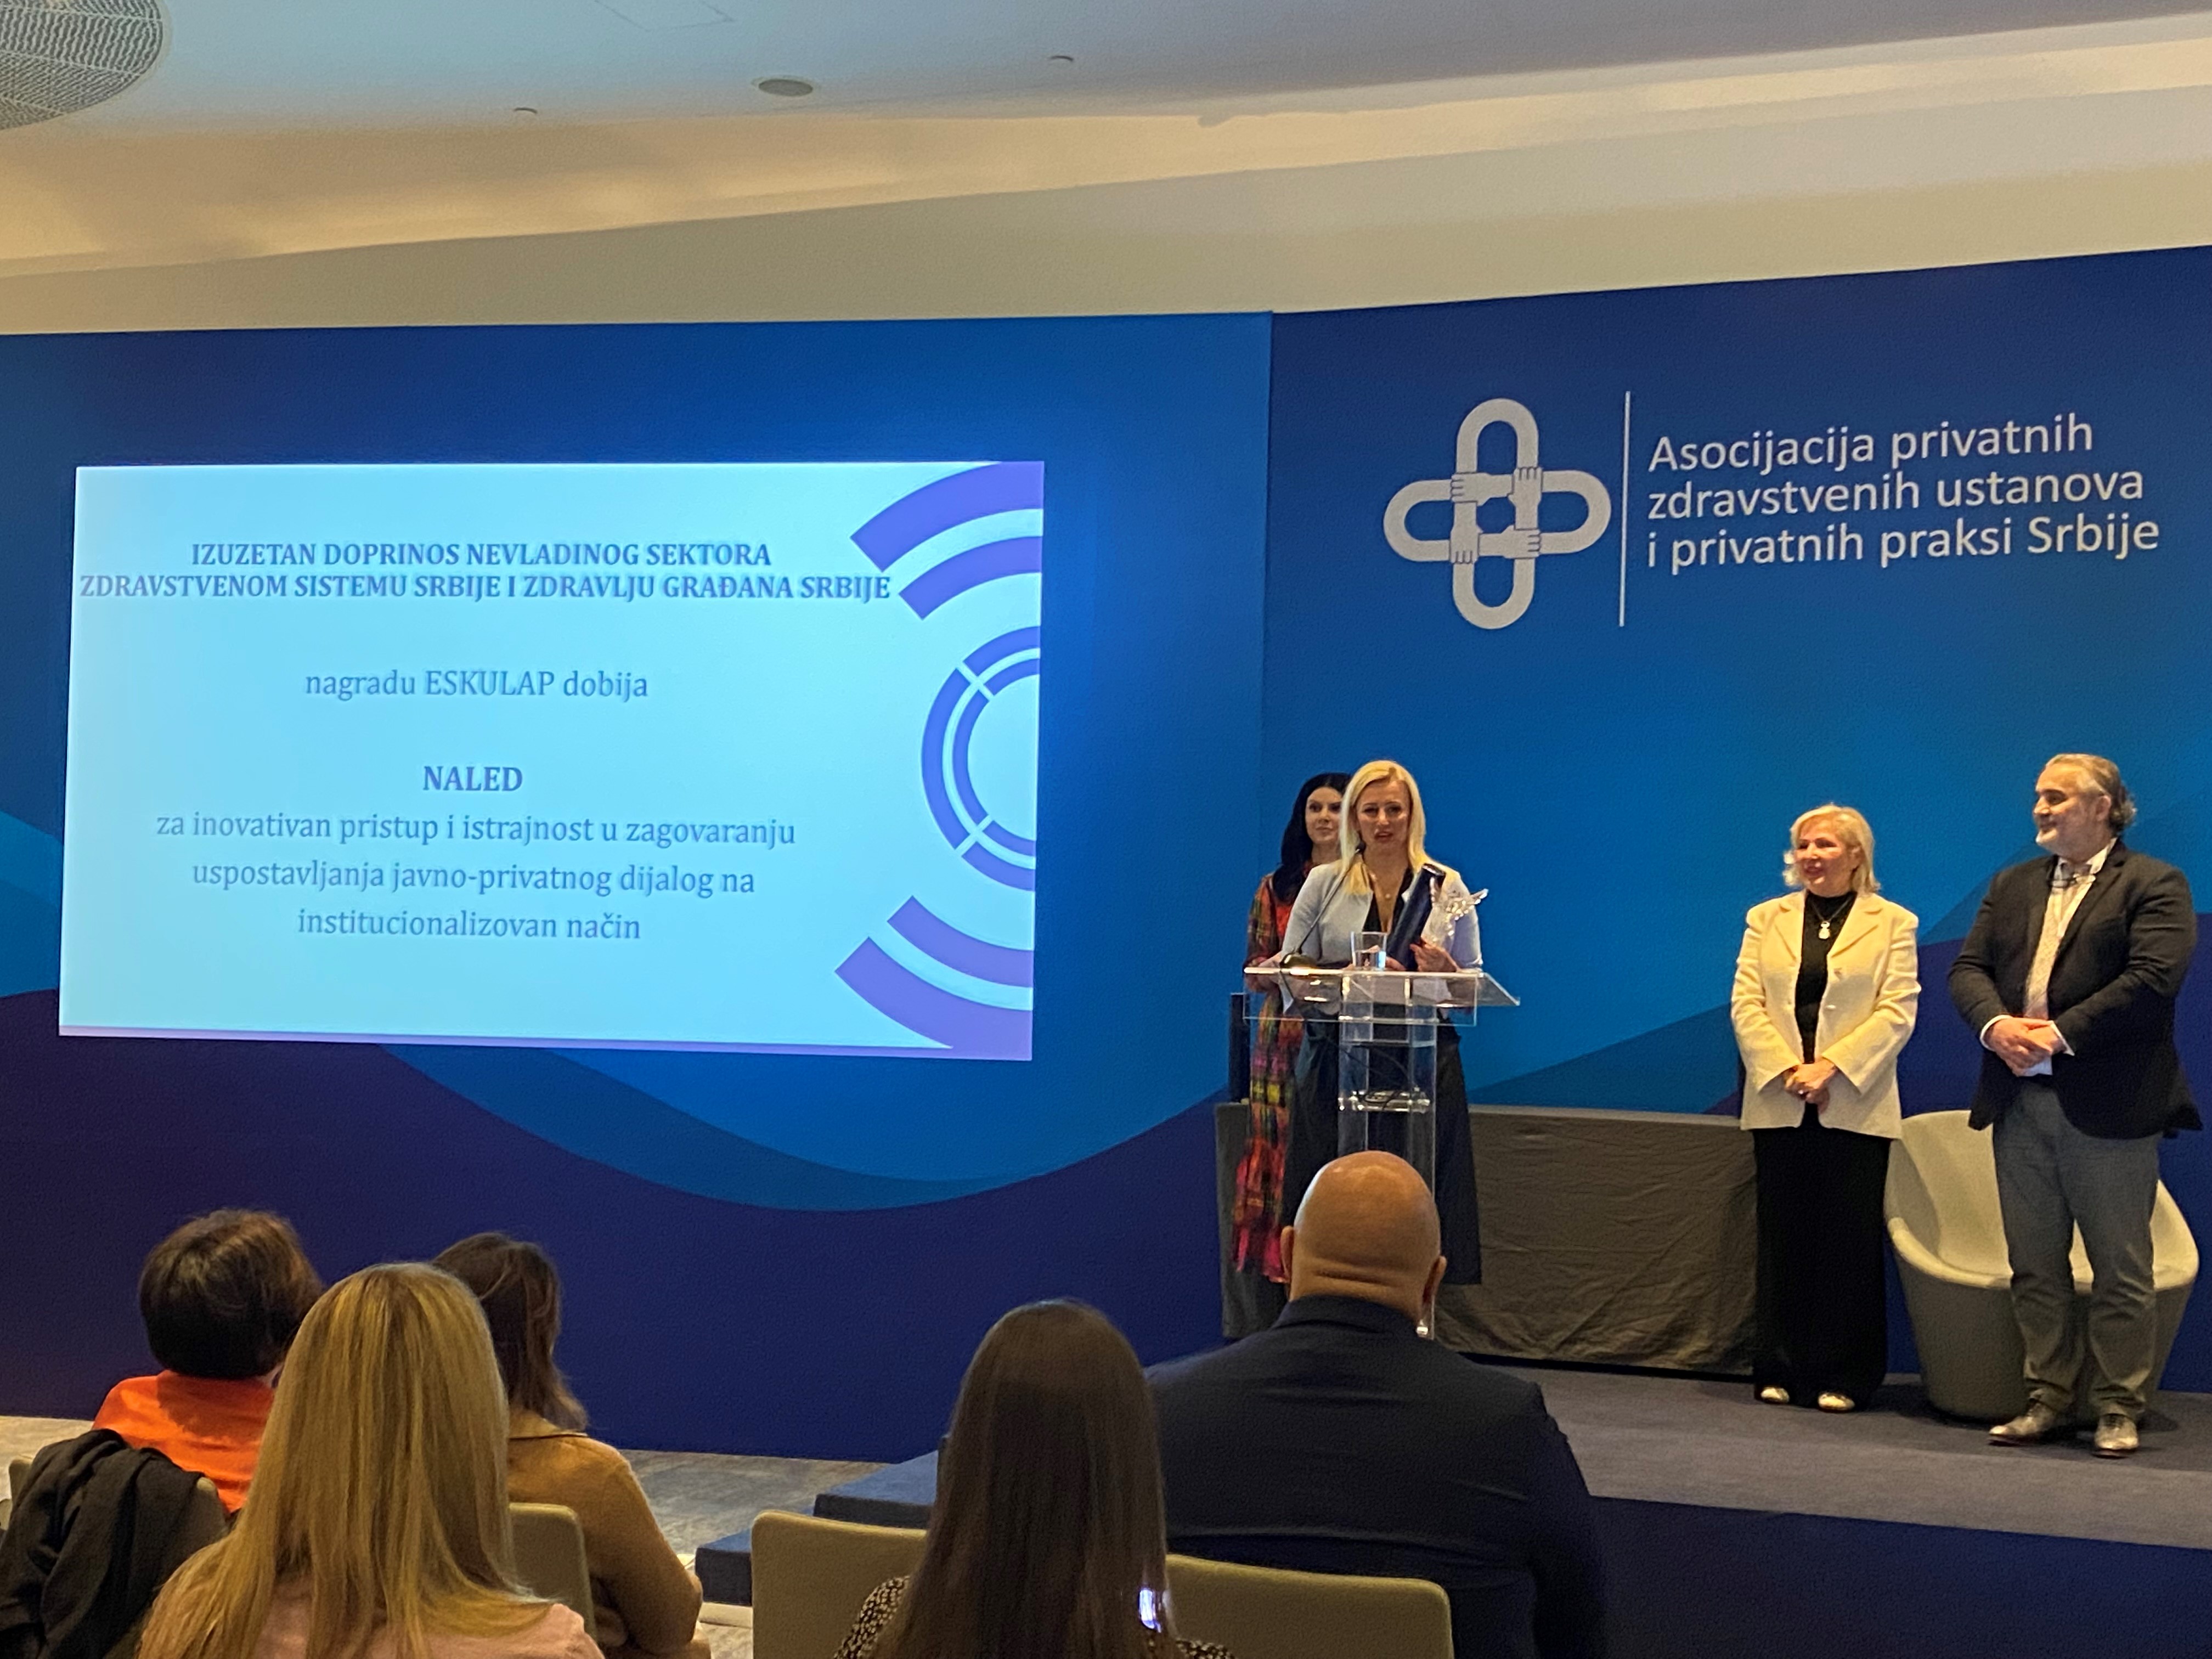 NALED receives ESCULAP award for outstanding contribution to the health system of Serbia